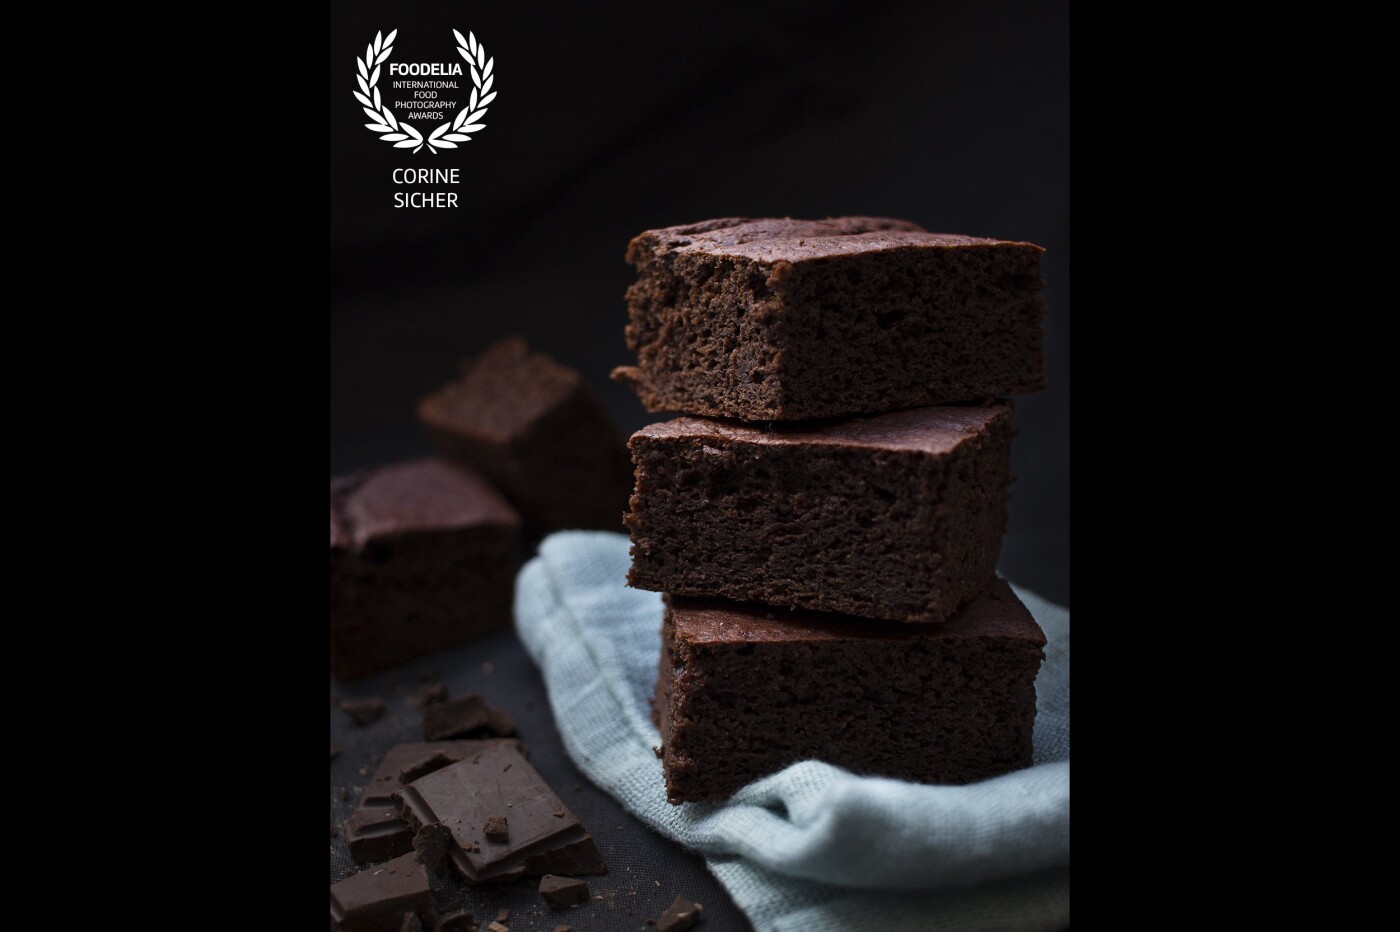 Just one shot in the dark - and I got this moody picture! Available light and of course these super-fluffy brownies. For those who are afraid of excessive calories, this recipe get along without Sugar and in place of butter, a homemade applesauce features the stickiness. 